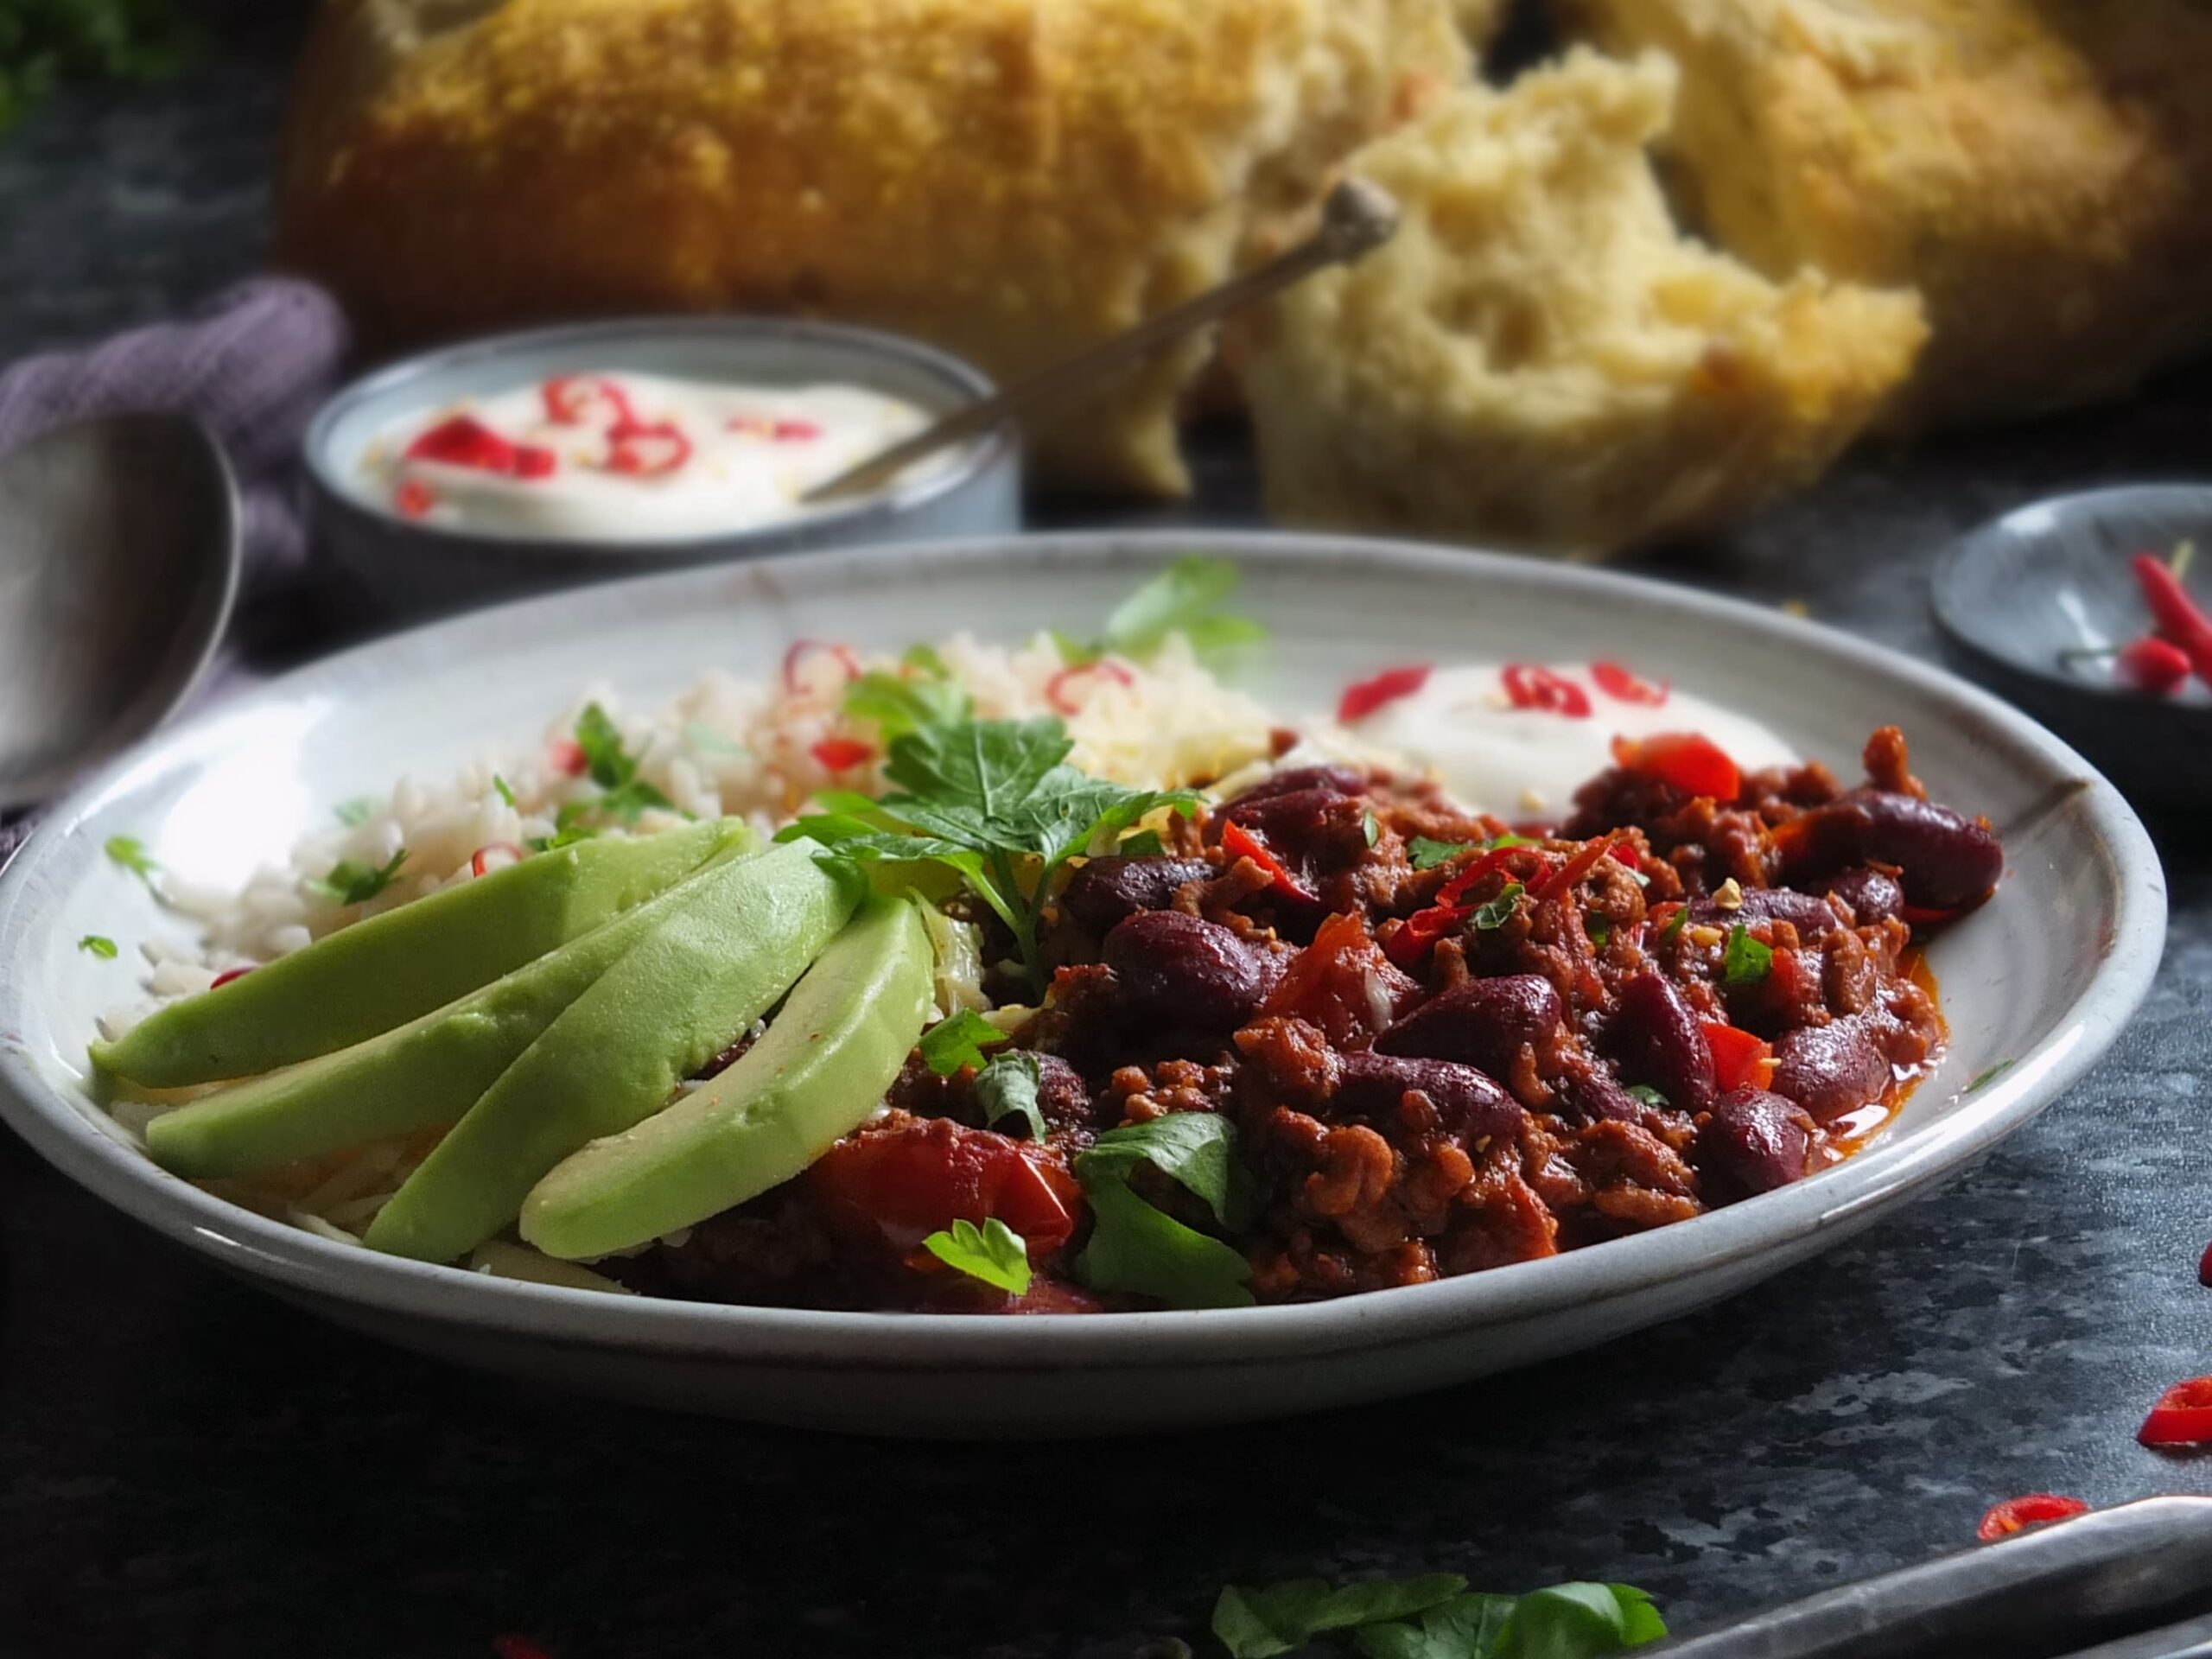 Dark moody image of chilli con carne served on a plate with rice and avocado, garnished with coriander leaves.